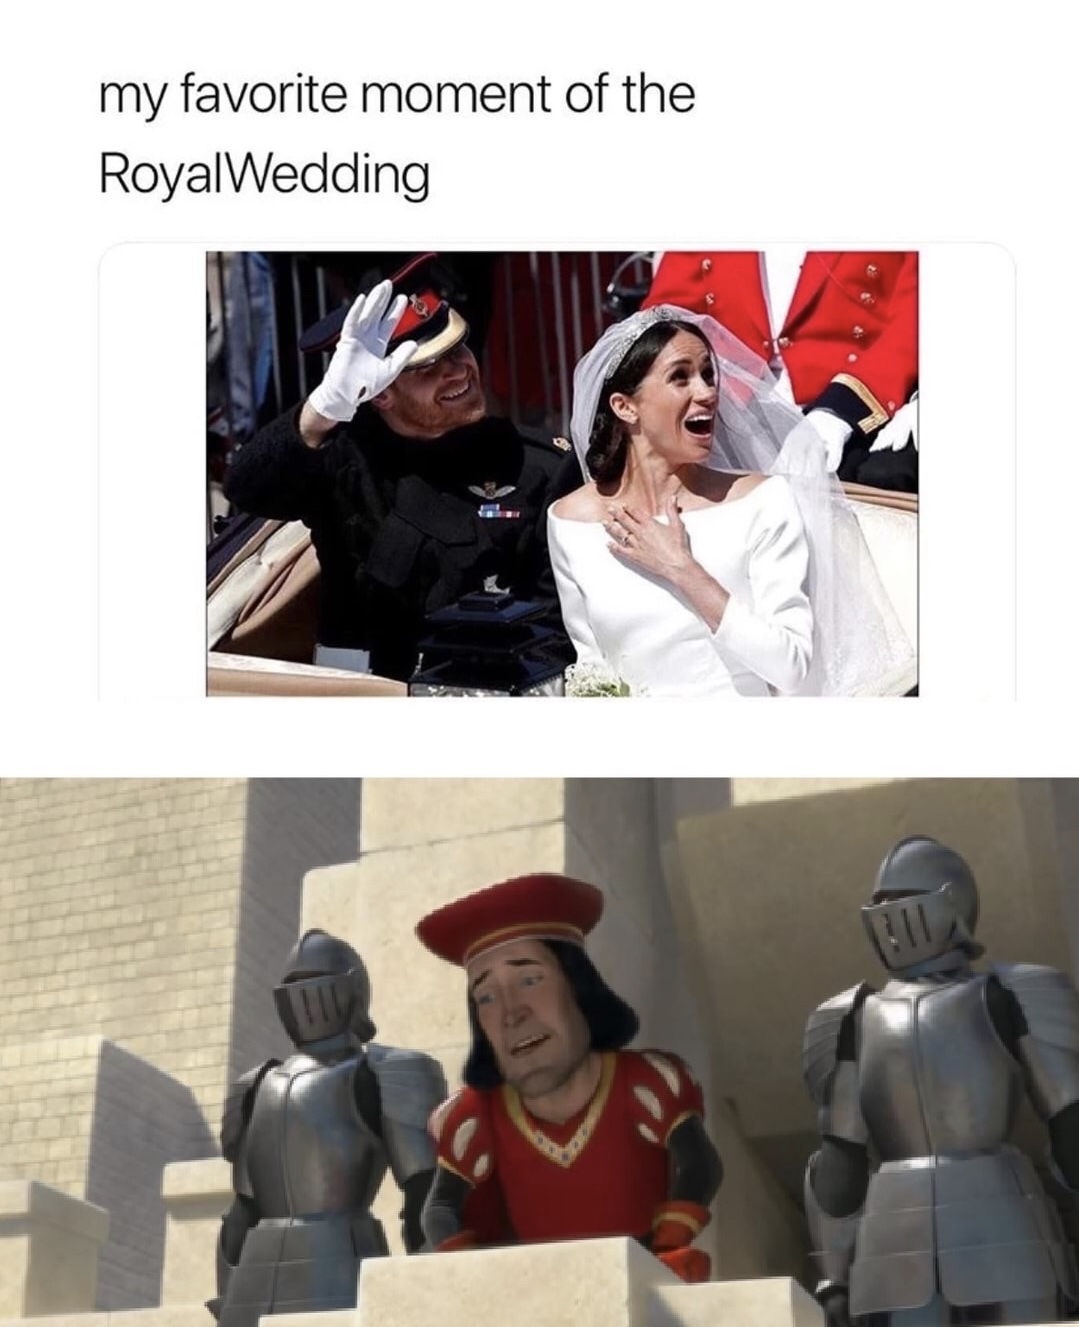 memes - lord farquaad - my favorite moment of the RoyalWedding